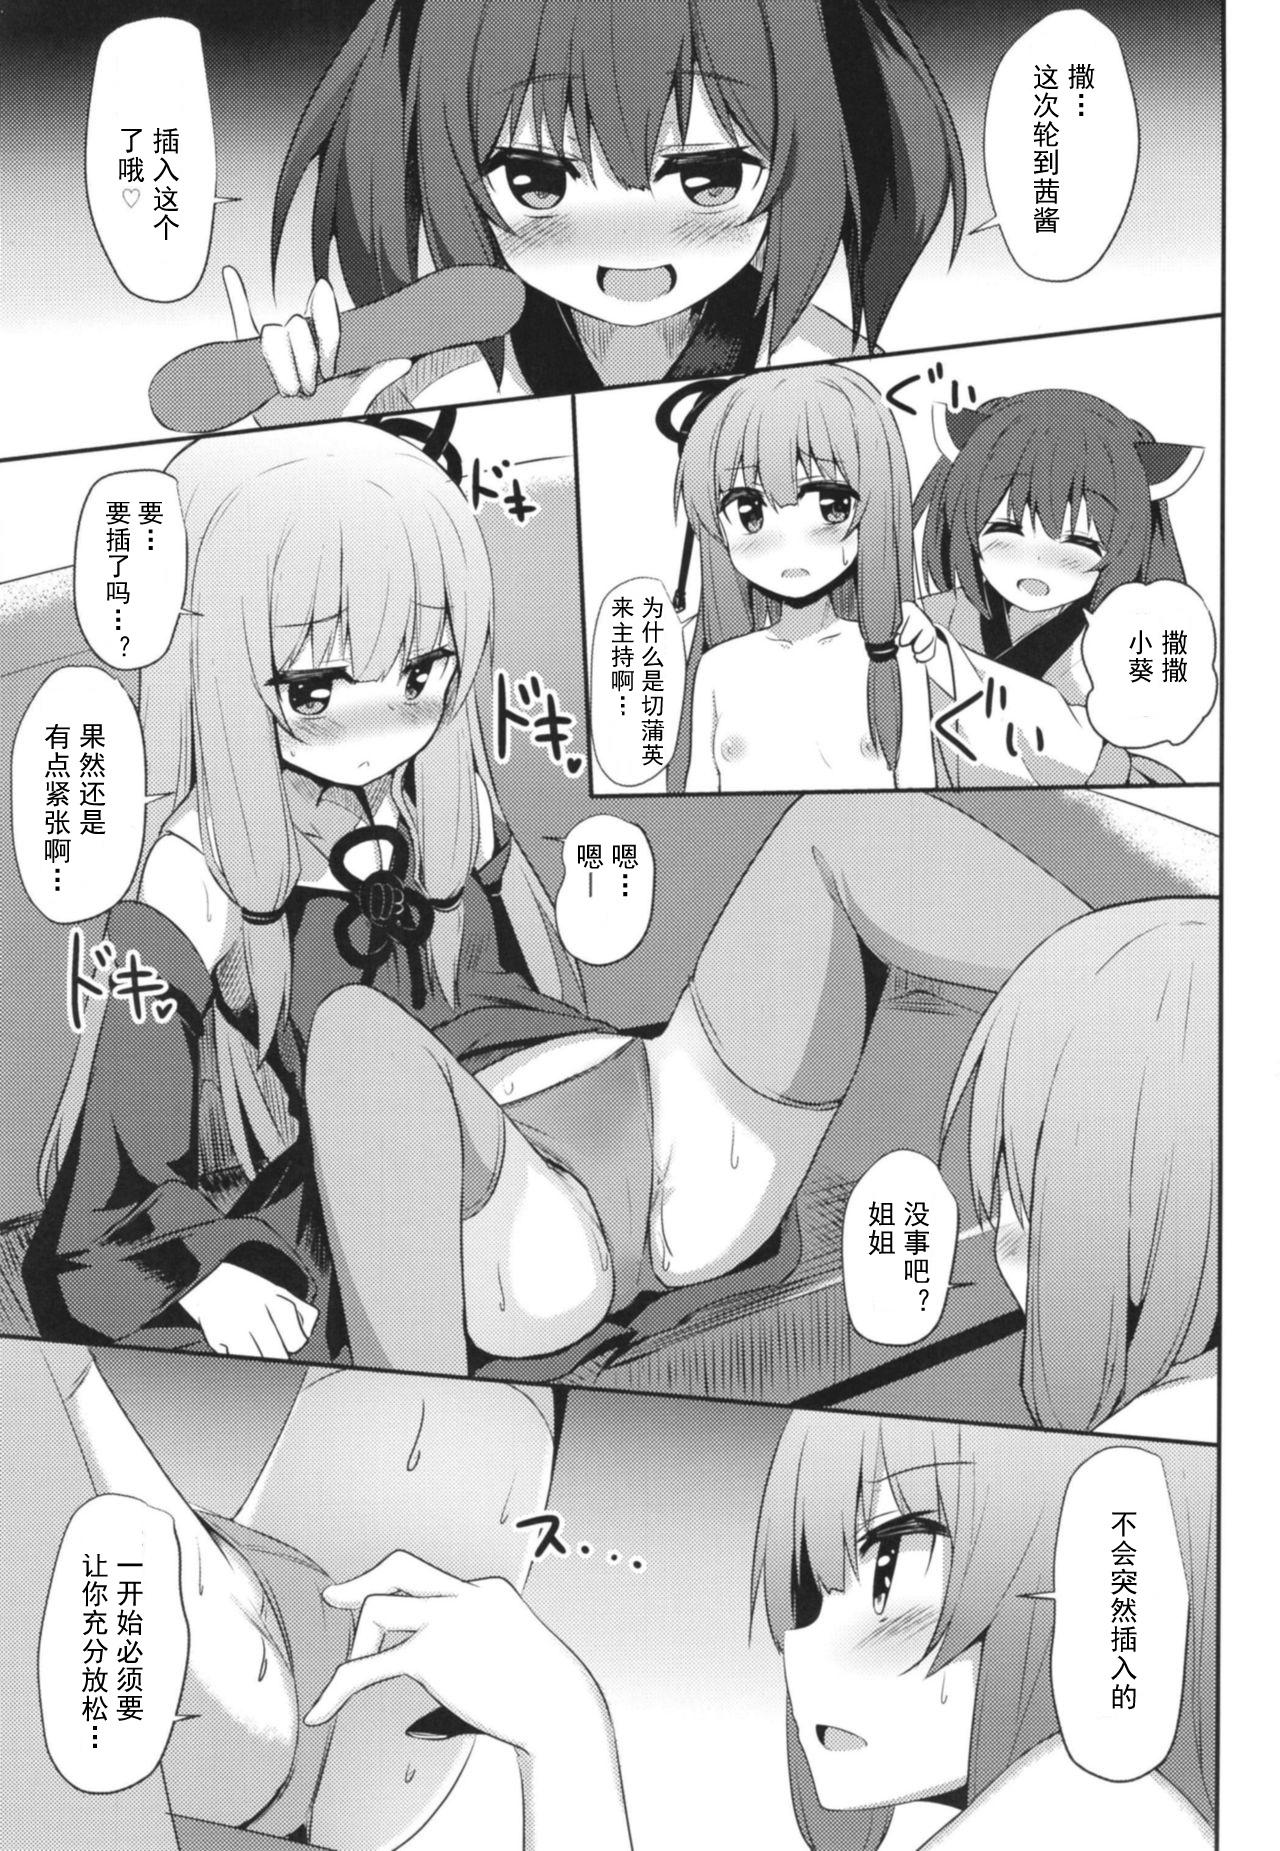 Blackcocks [Milk Pudding (Jamcy)] Akane-chan Challenge! 4-kaime (VOICEROID) [Chinese] [古早个人汉化] [Digital] - Voiceroid Pain - Page 3